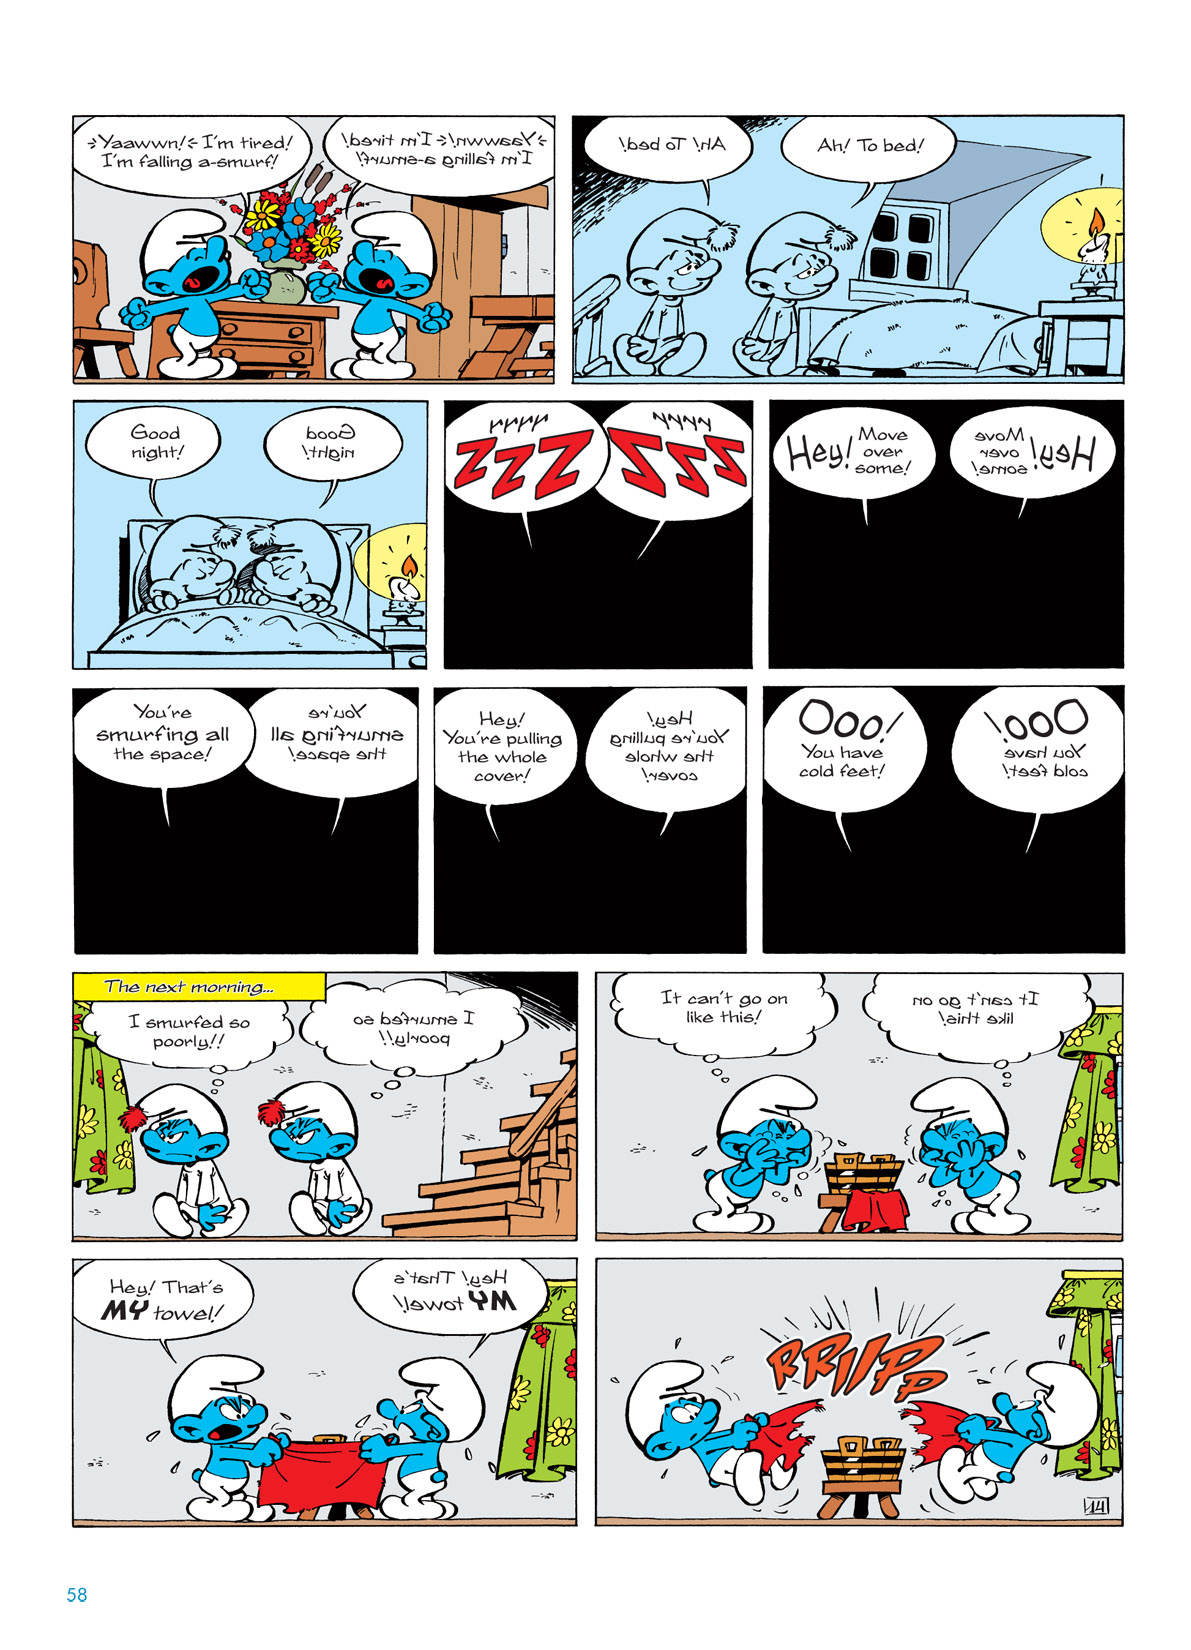 Read online The Smurfs comic -  Issue #5 - 58